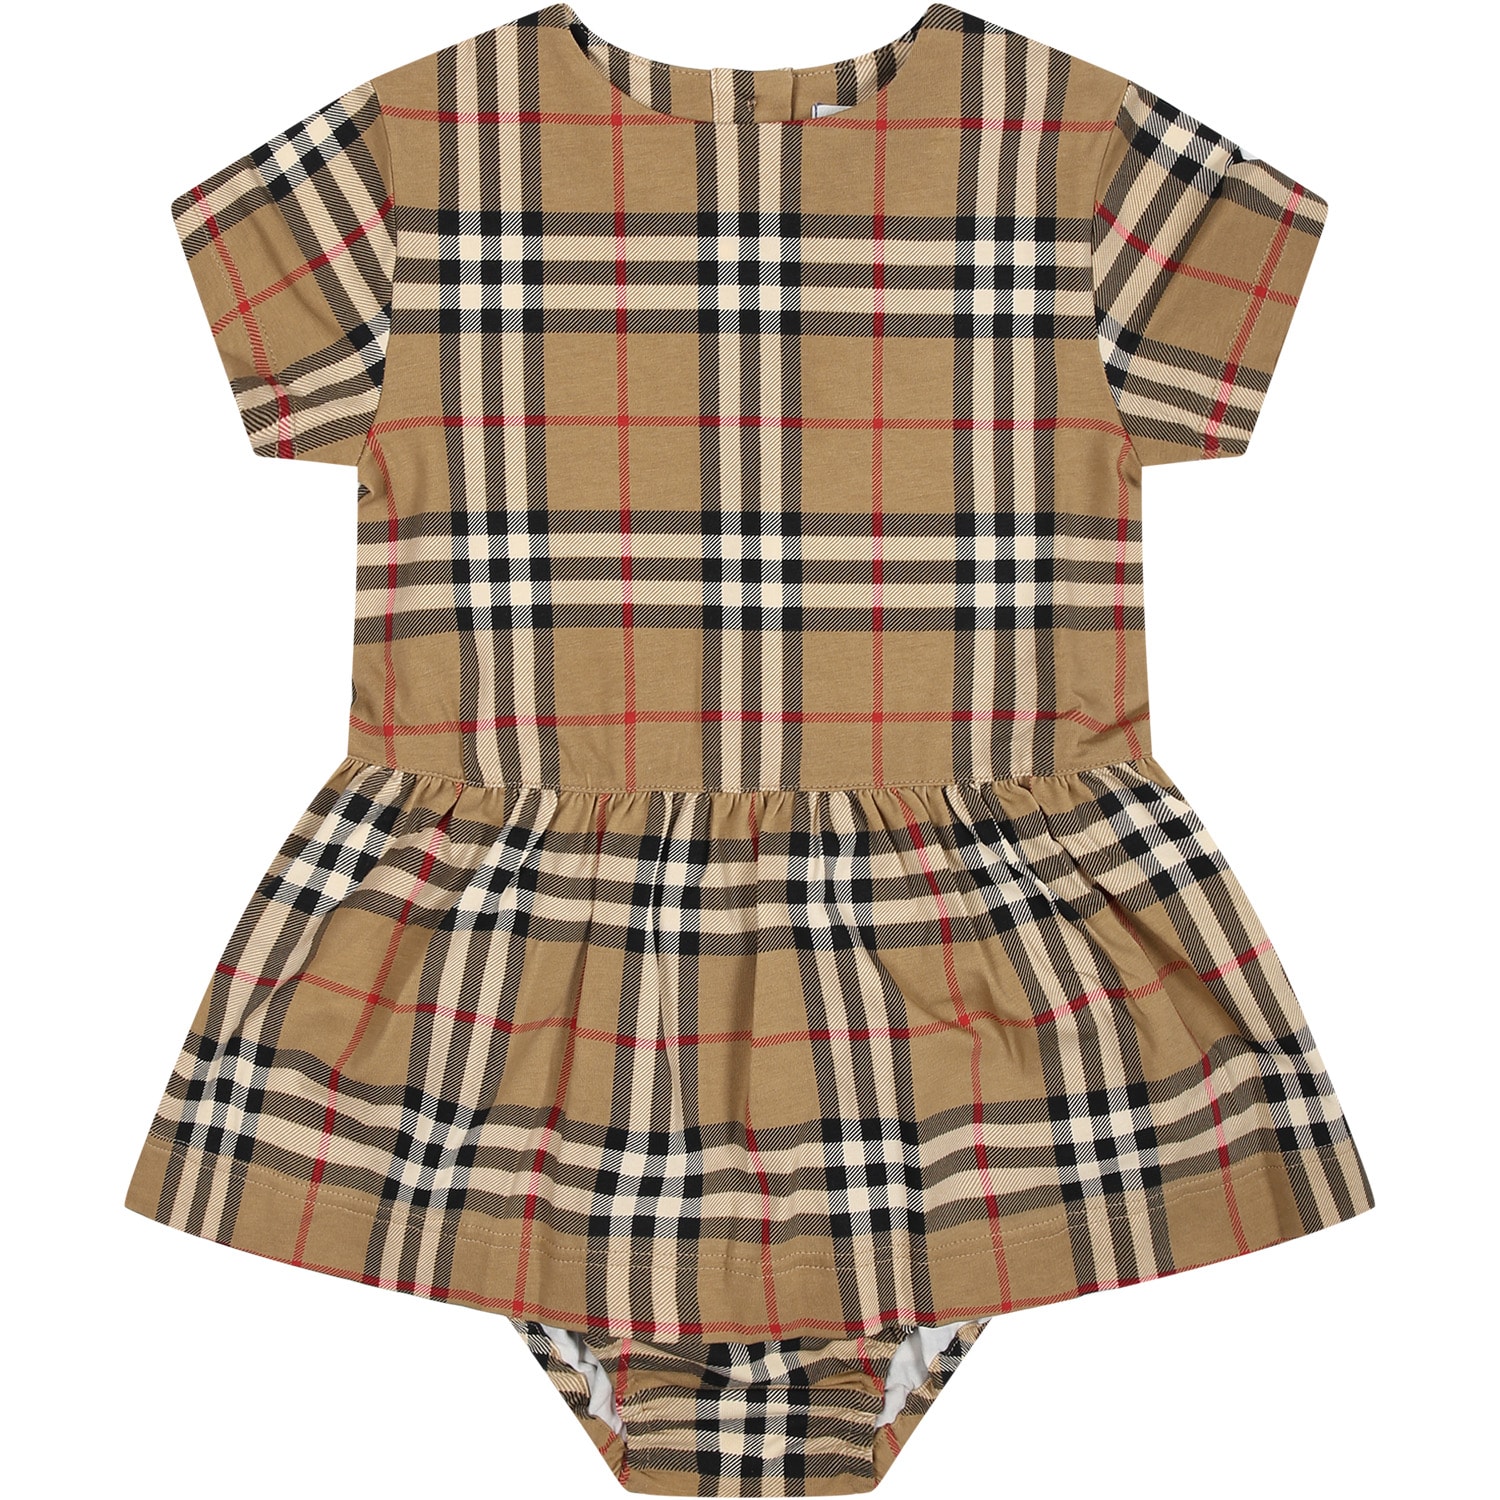 Burberry Beige Dress For Baby Girl With Iconic All-over Vintage Check